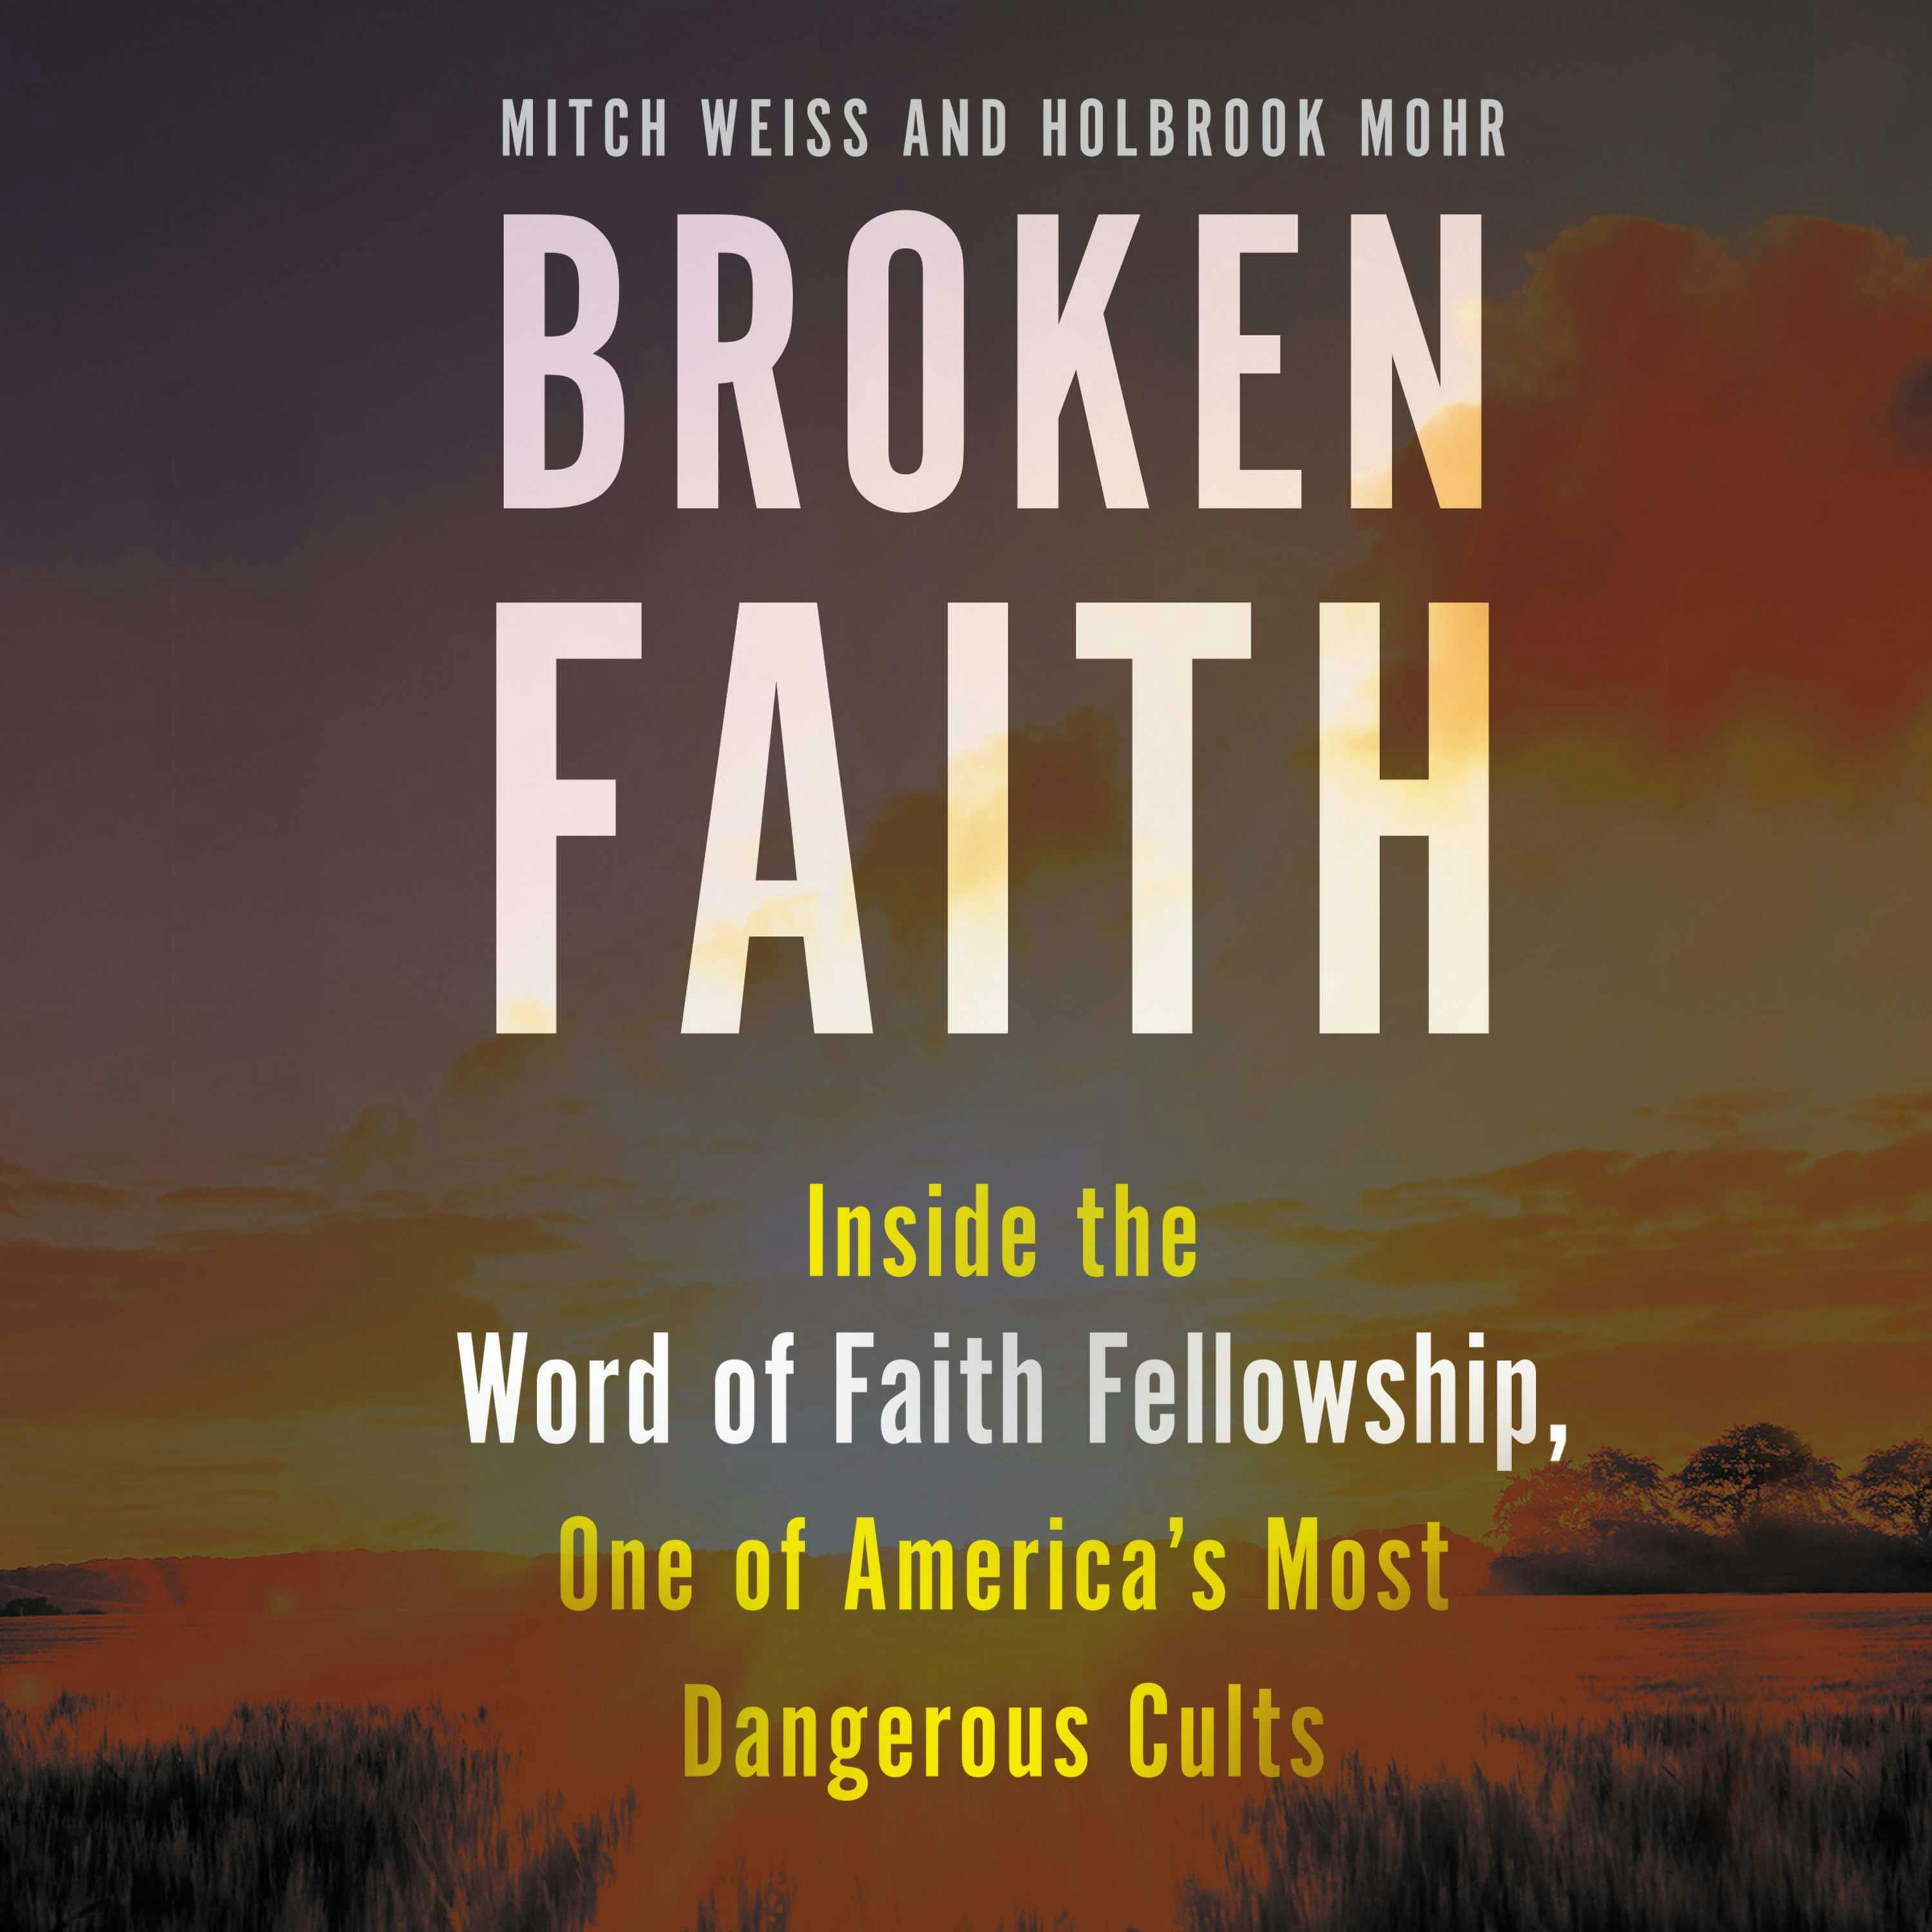 Broken Faith: Inside the Word of Faith Fellowship, One of America's Most Dangerous Cults - Holbrook Mohr, Mitch Weiss